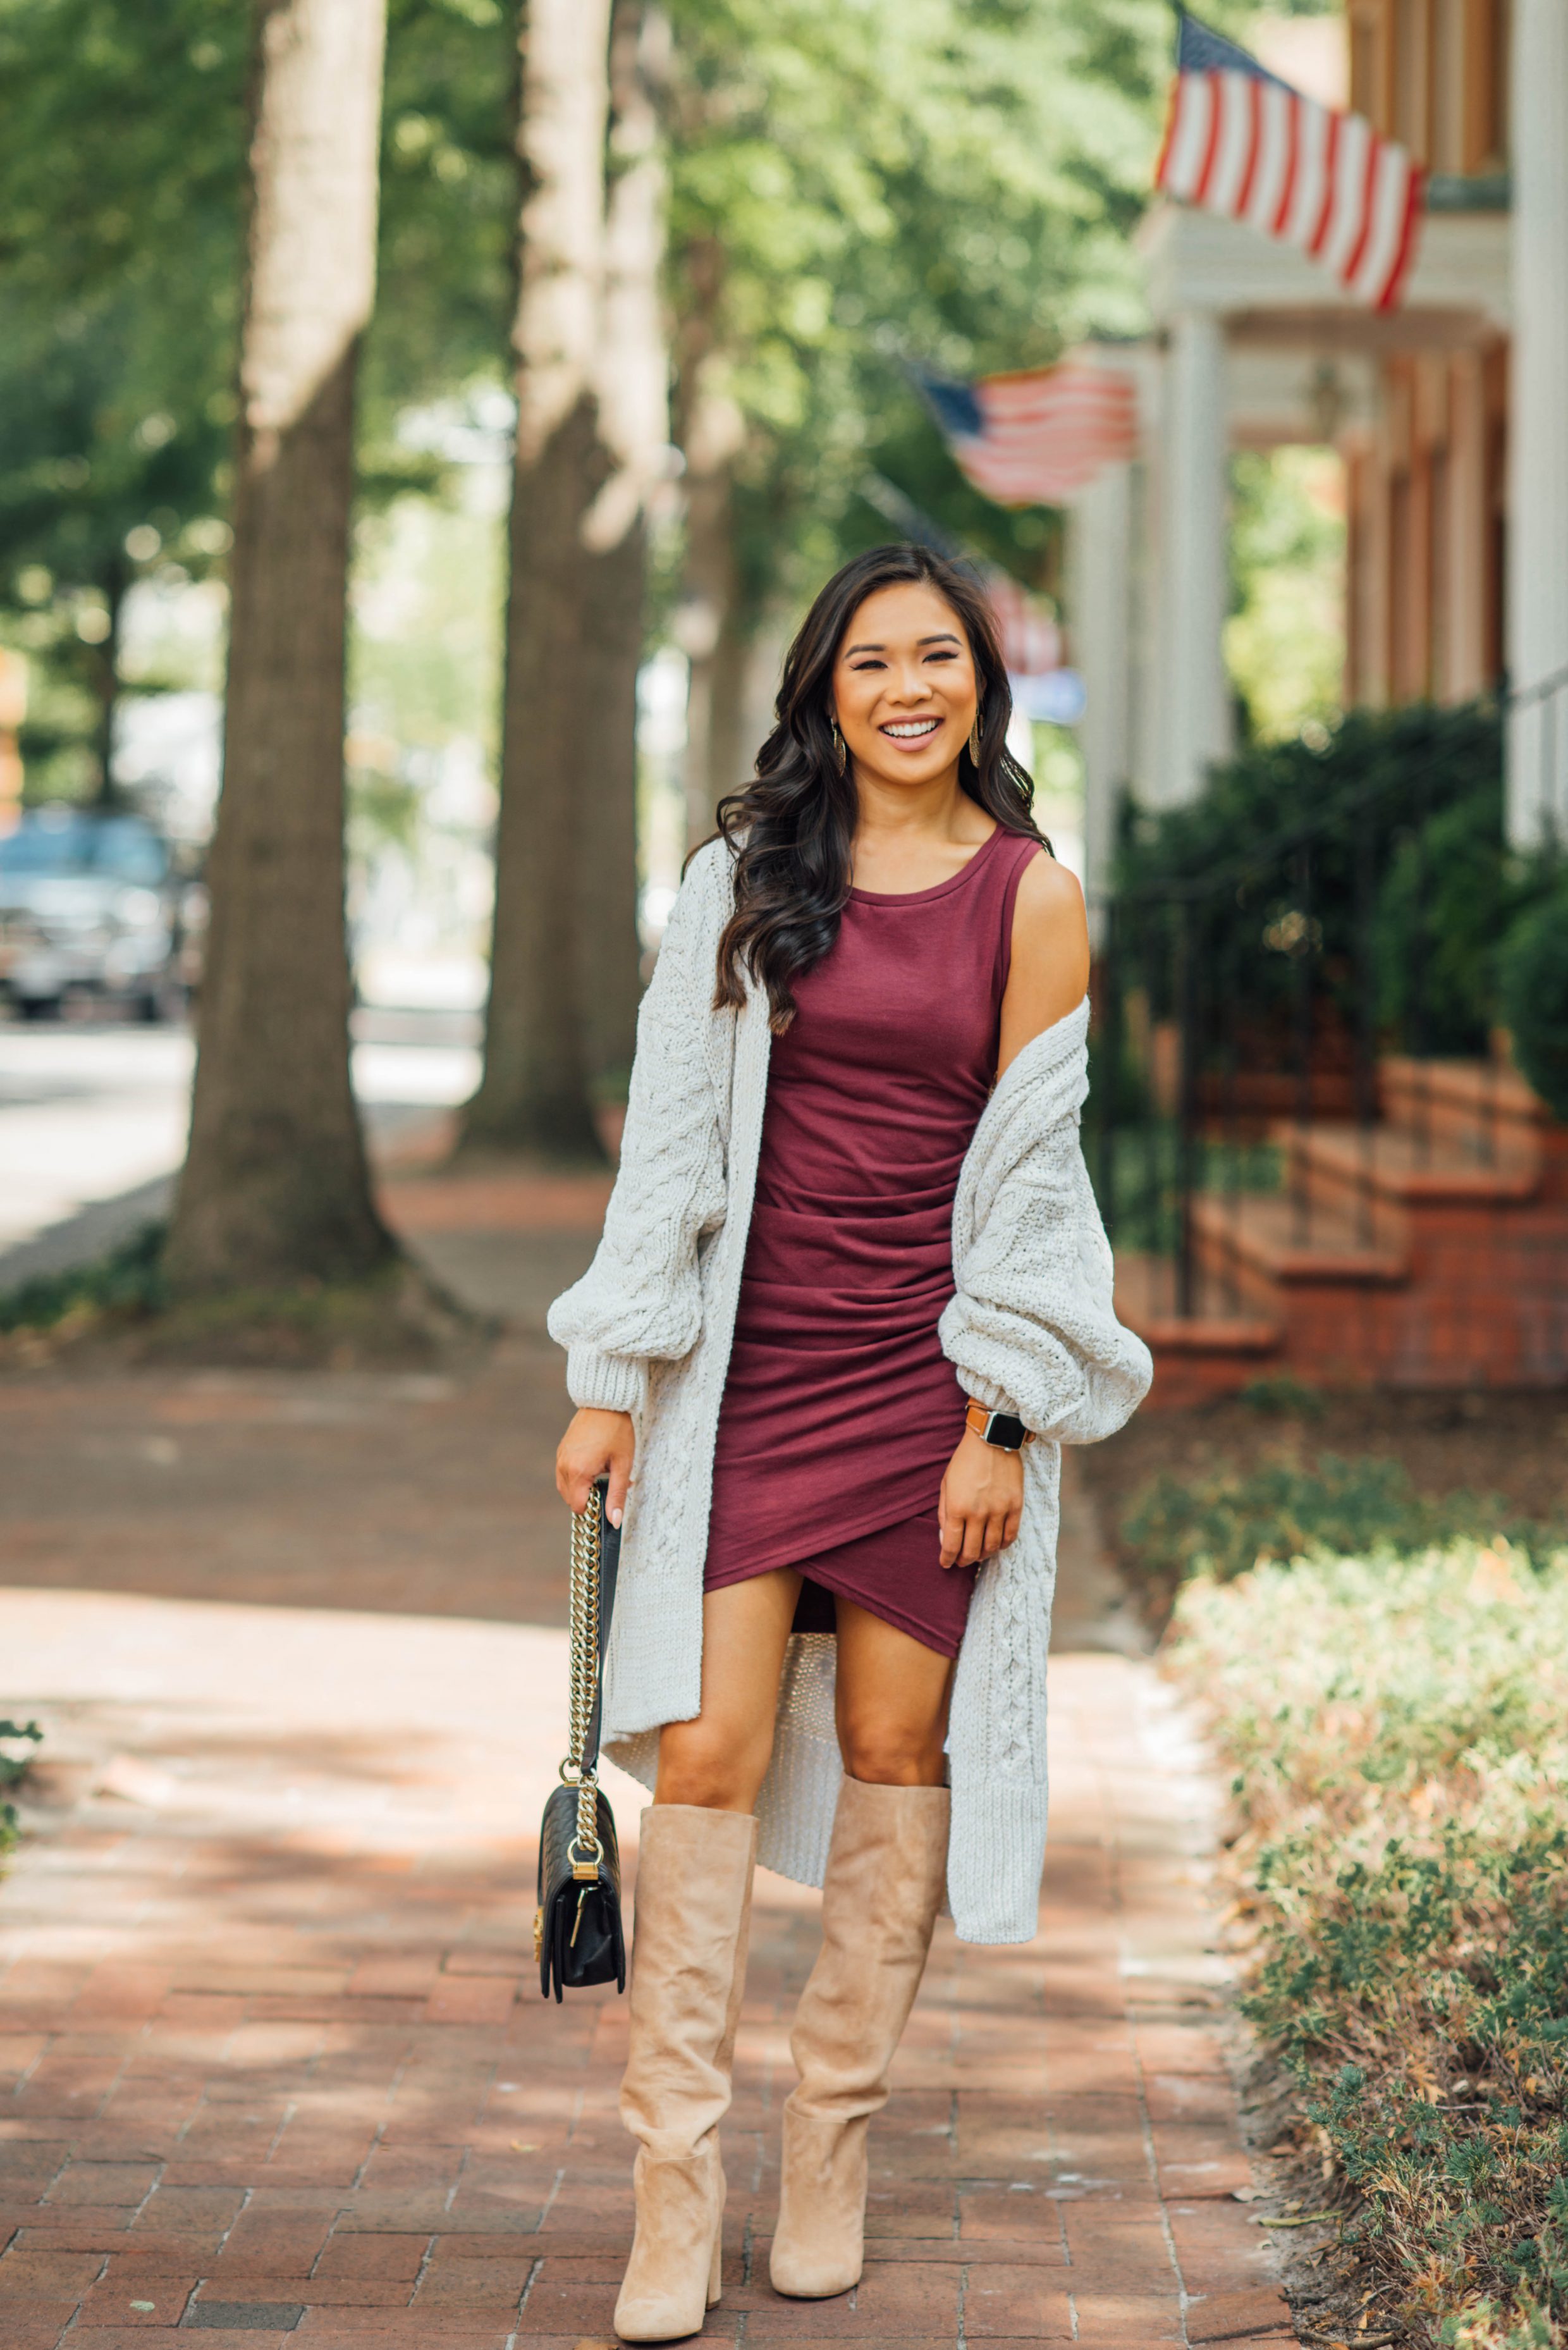 Effortlessly Chic: Cozy Cardigan & Knee-High Boots